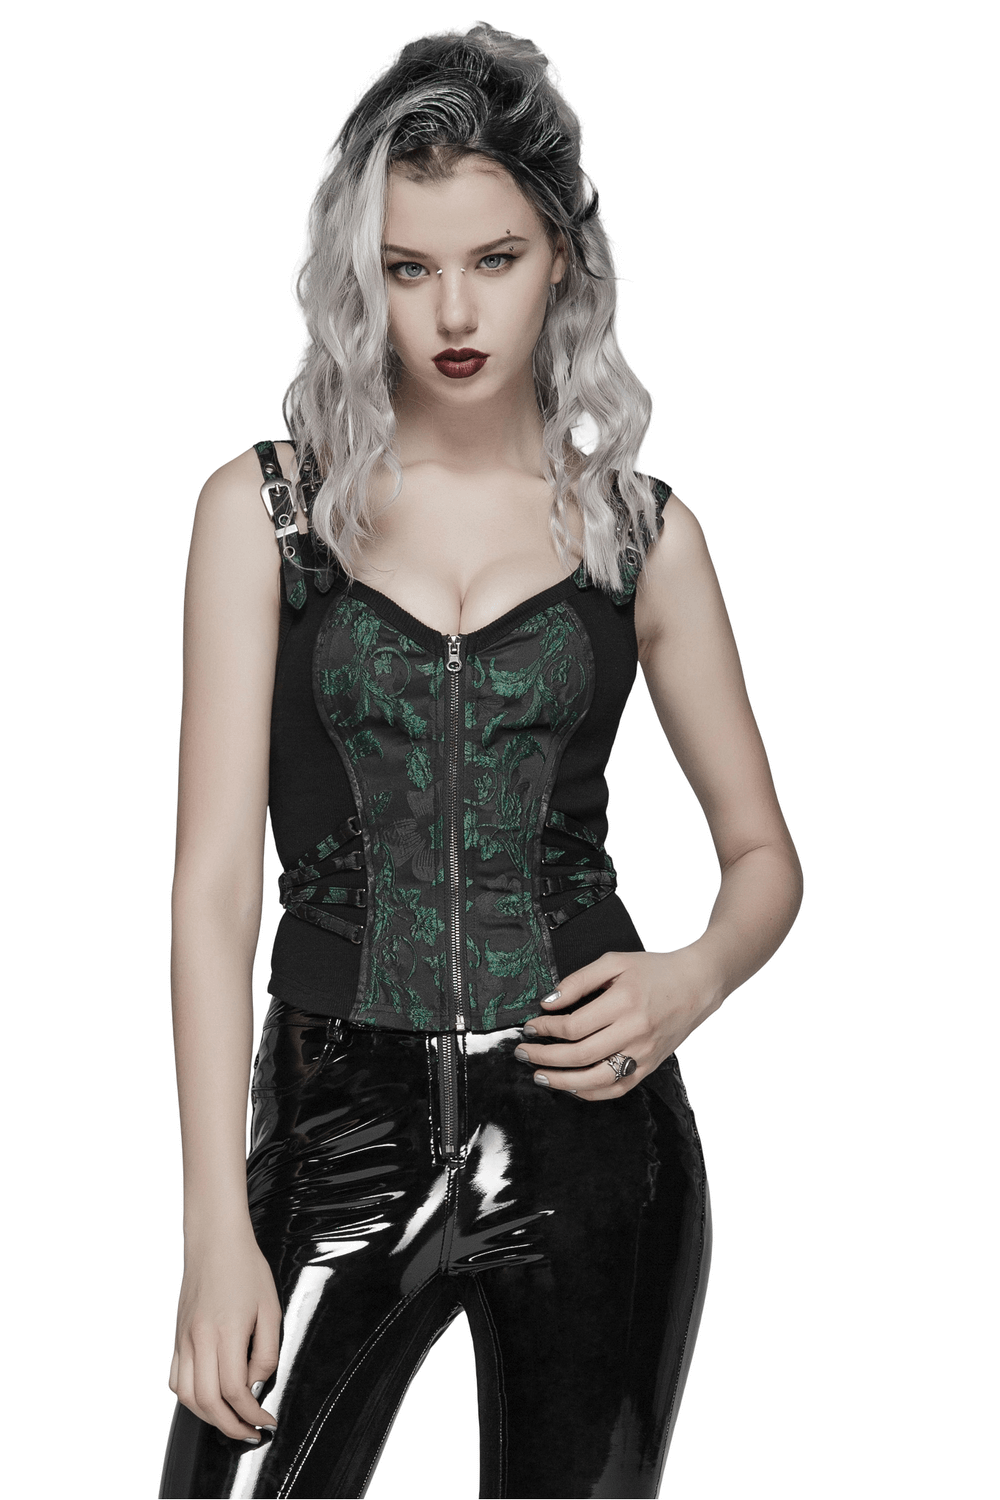 Lace Patent Leather Corset with Zipper Front and Lace-up Back